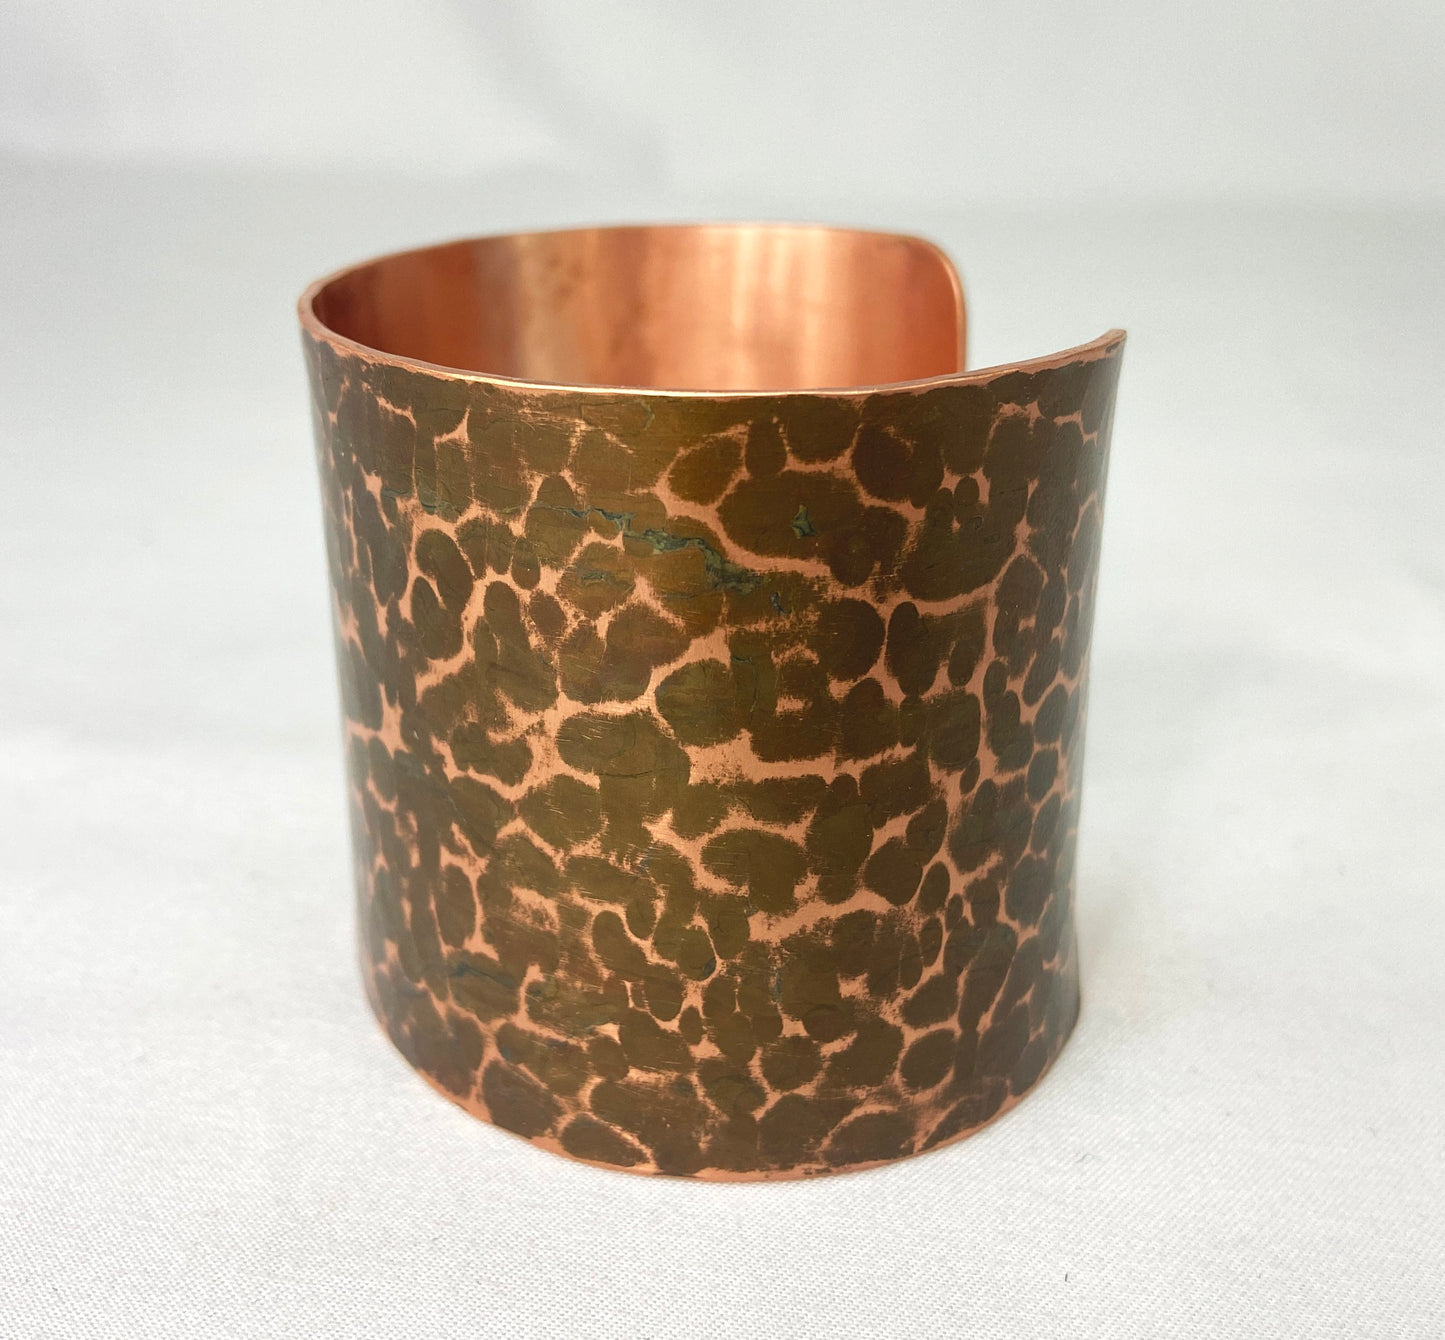 Hammered Copper Cuff Bracelet with Brown patina